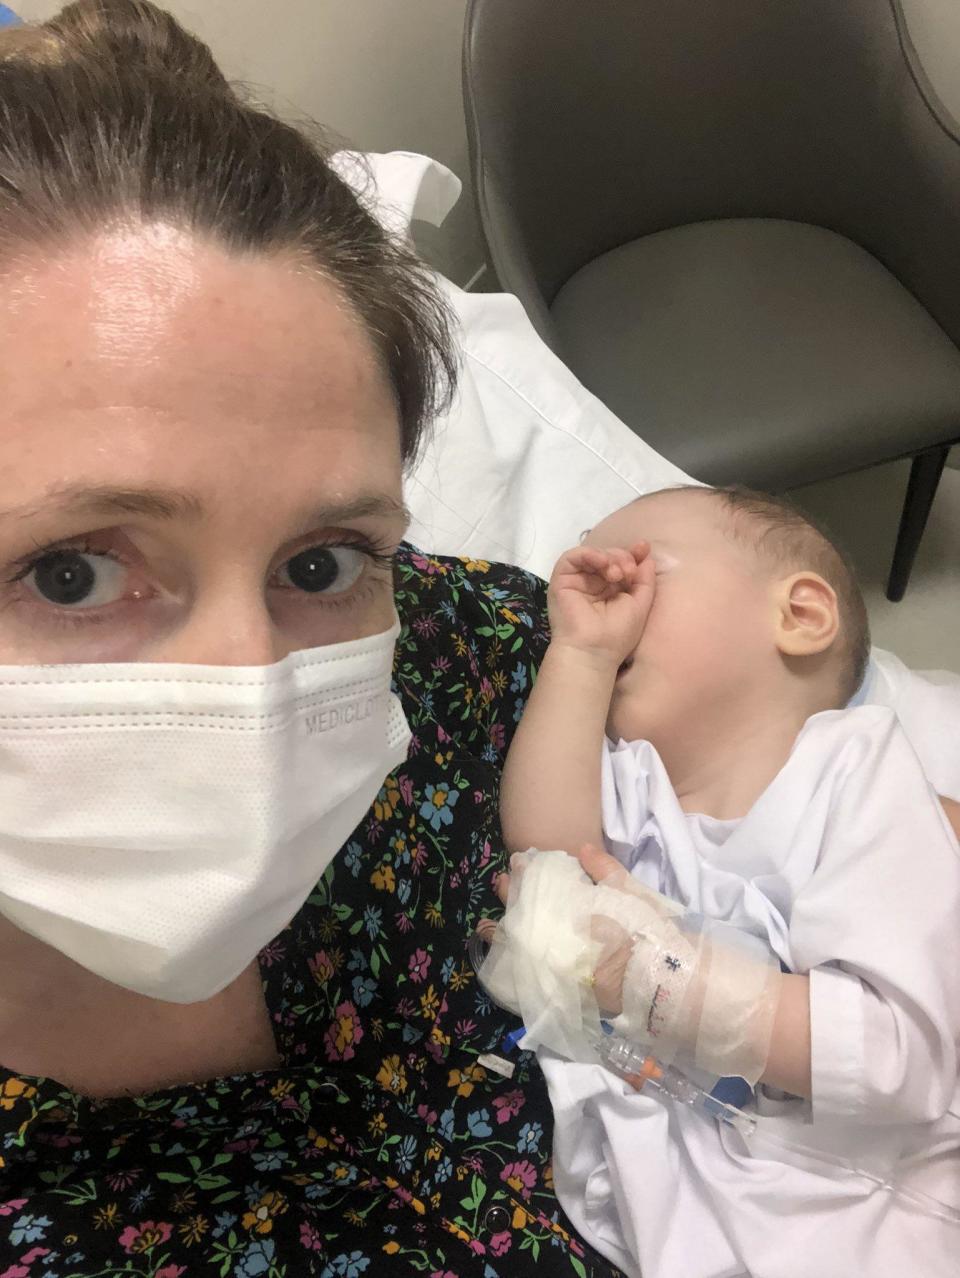 The north London mother whose nine-month-old baby is recovering from pneumonia is appealing for help after they became stranded in Peru because of the coronavirus pandemic. (PA)